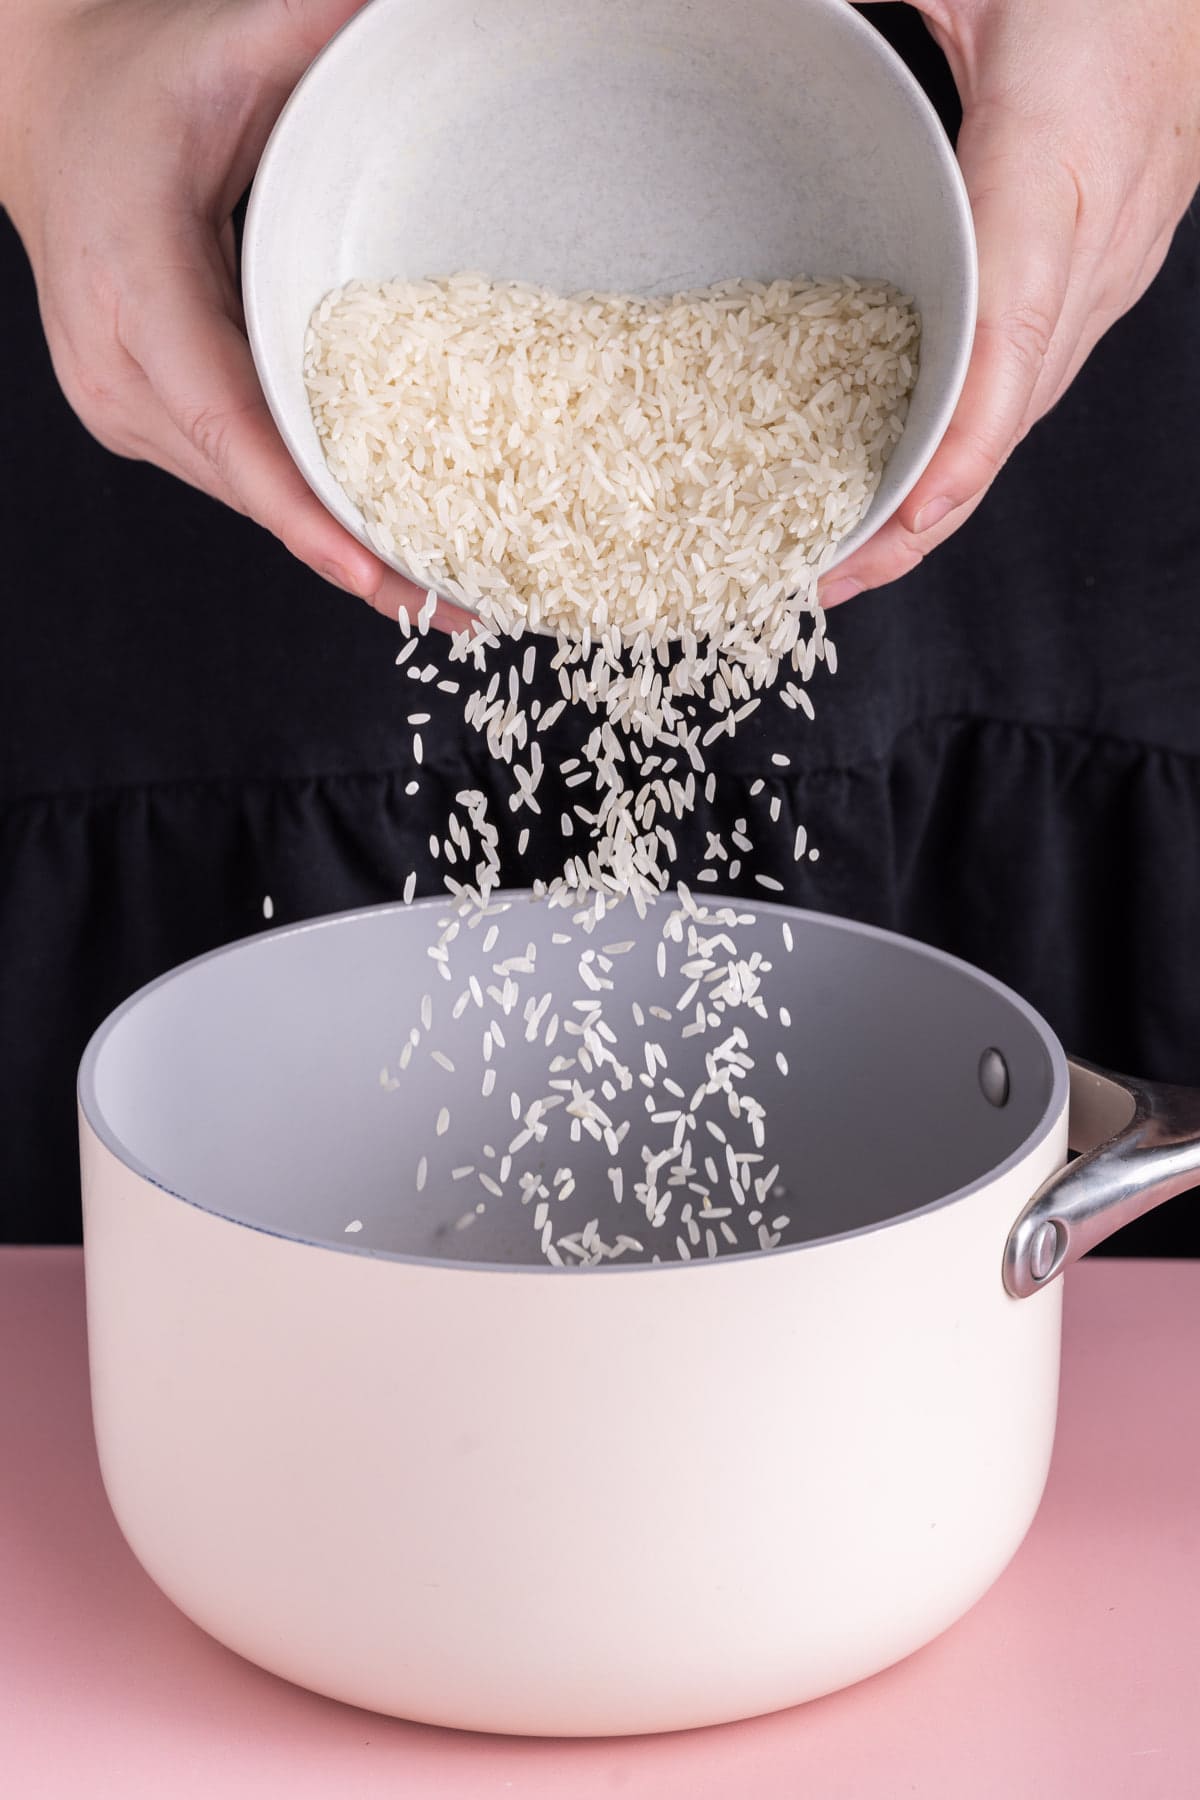 Pouring uncooked rice into a pot to make coconut rice